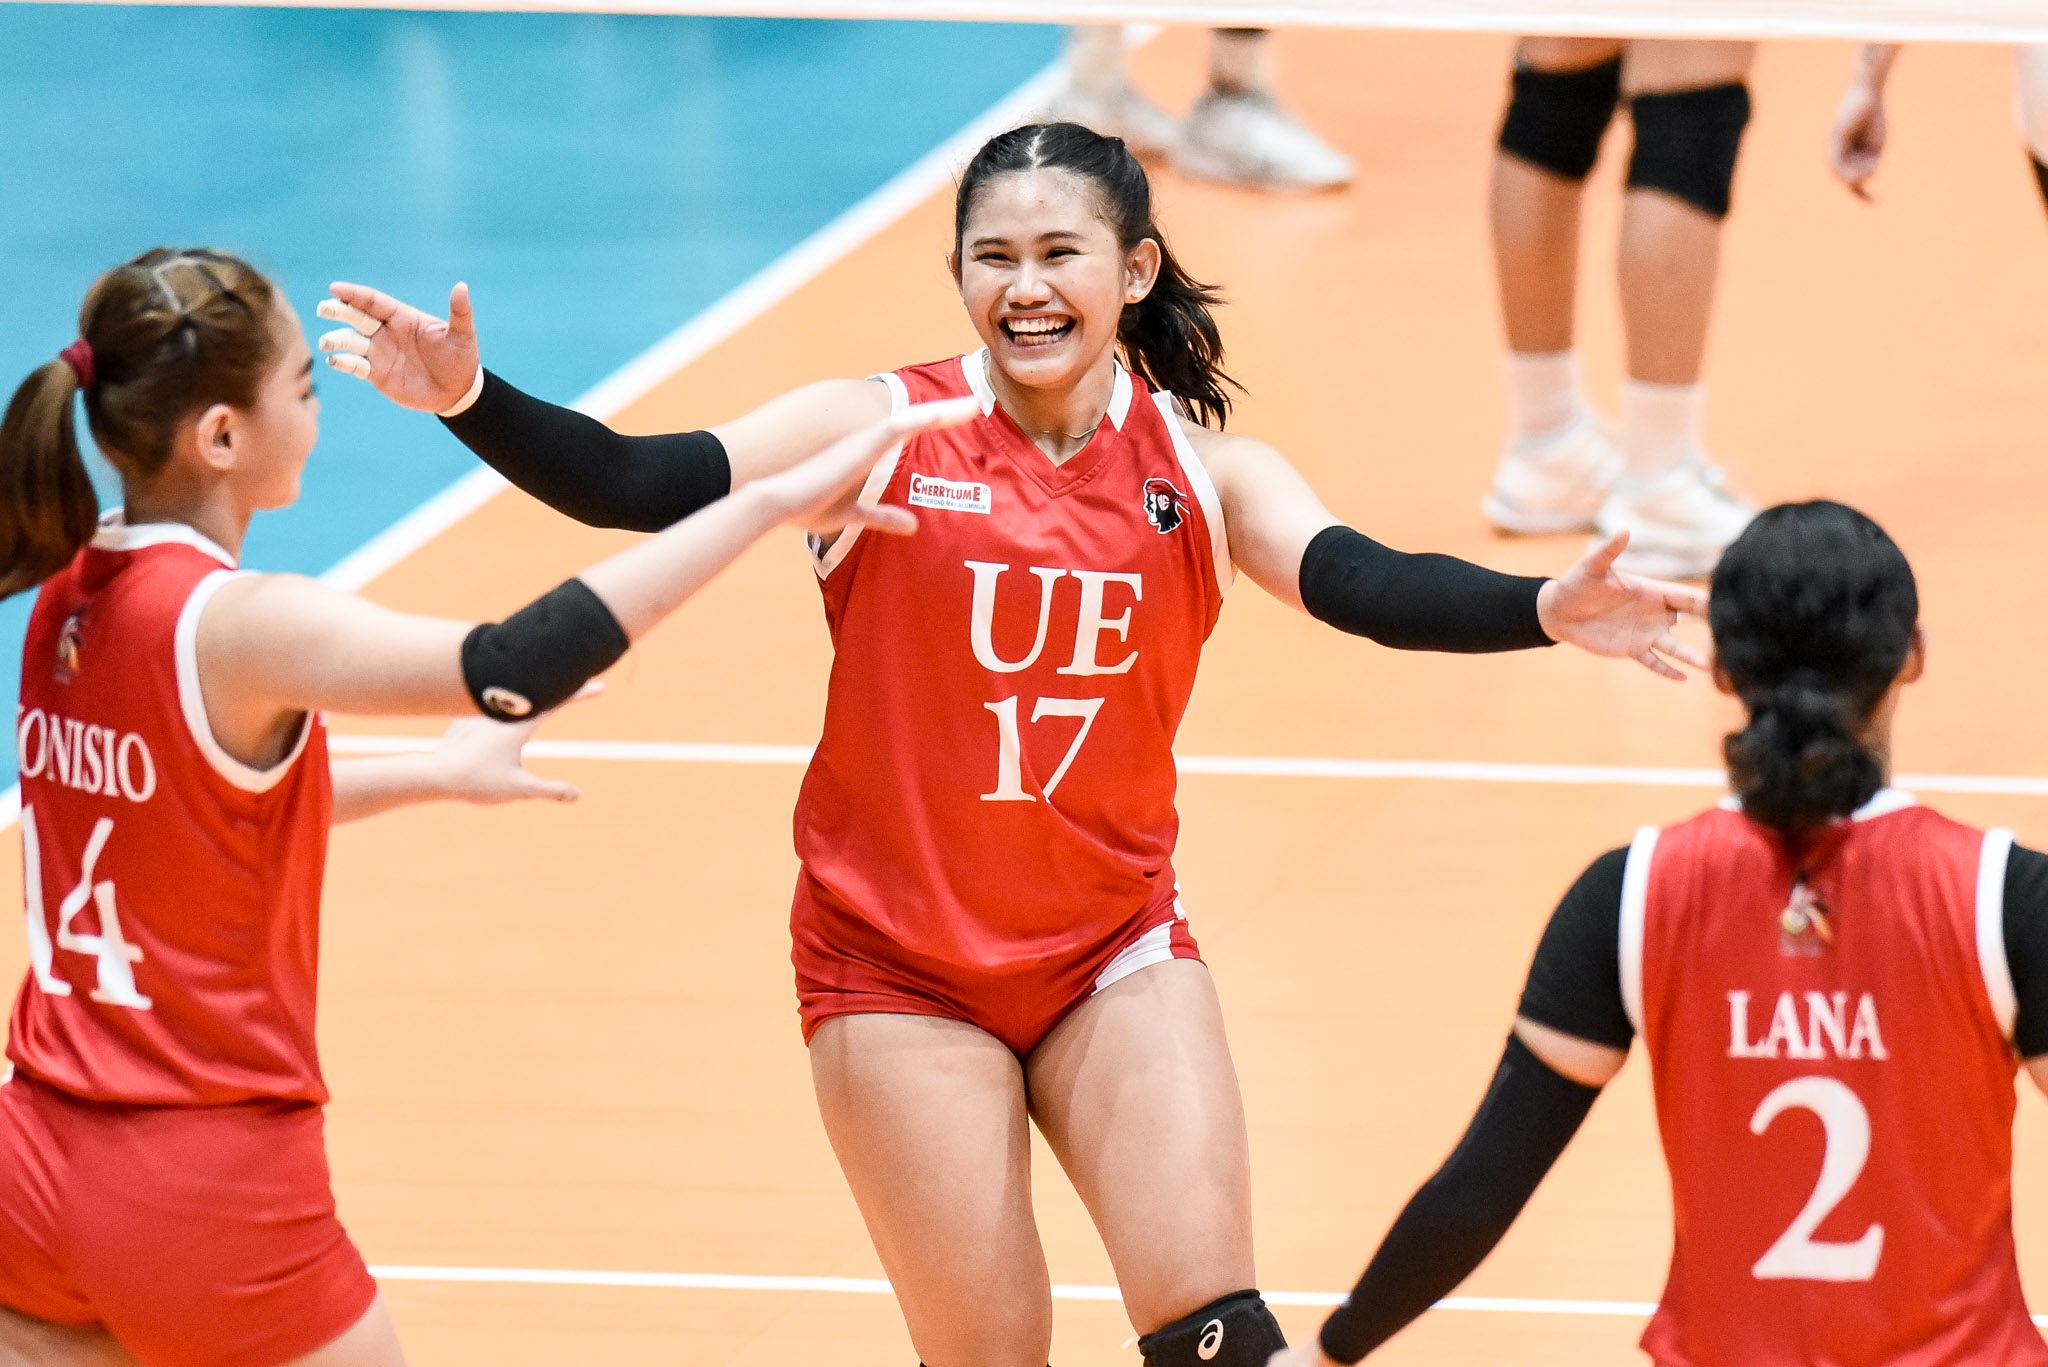 UE earns long-awaited win after 12 losses, sends UP to 10th straight defeat